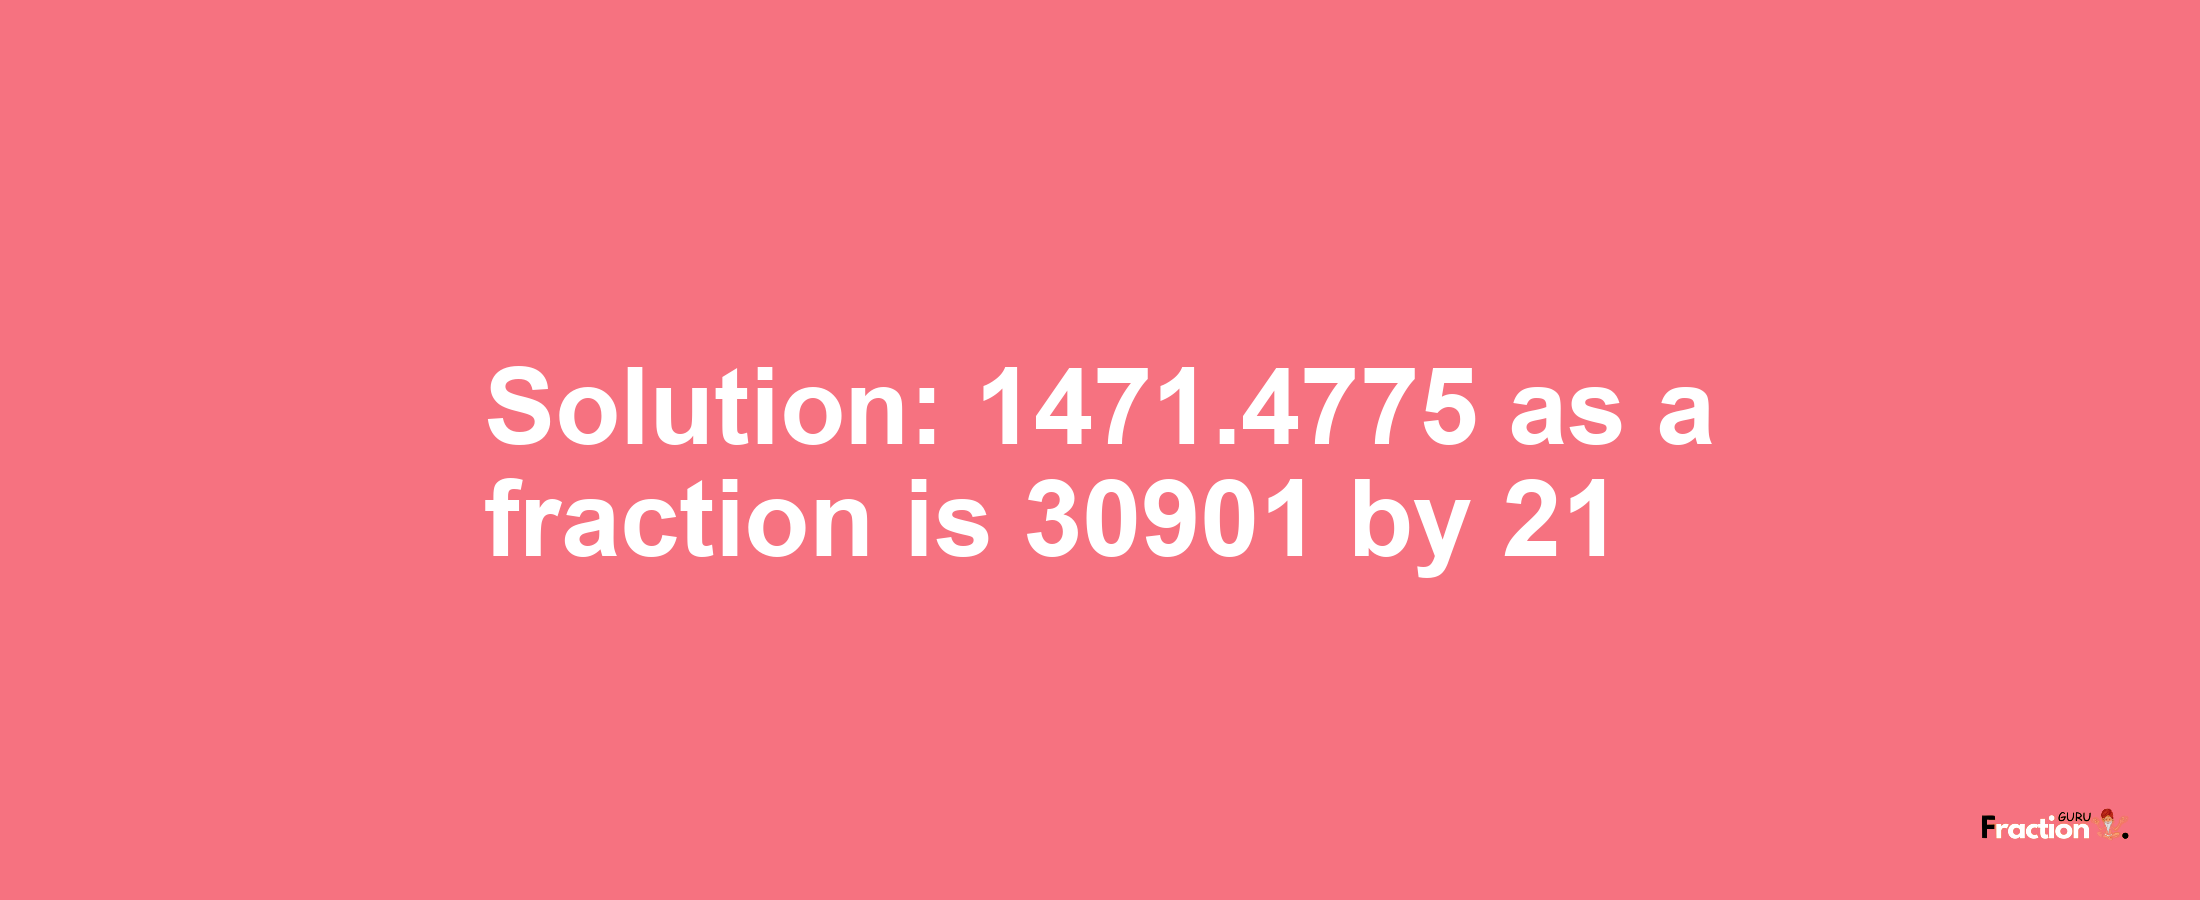 Solution:1471.4775 as a fraction is 30901/21